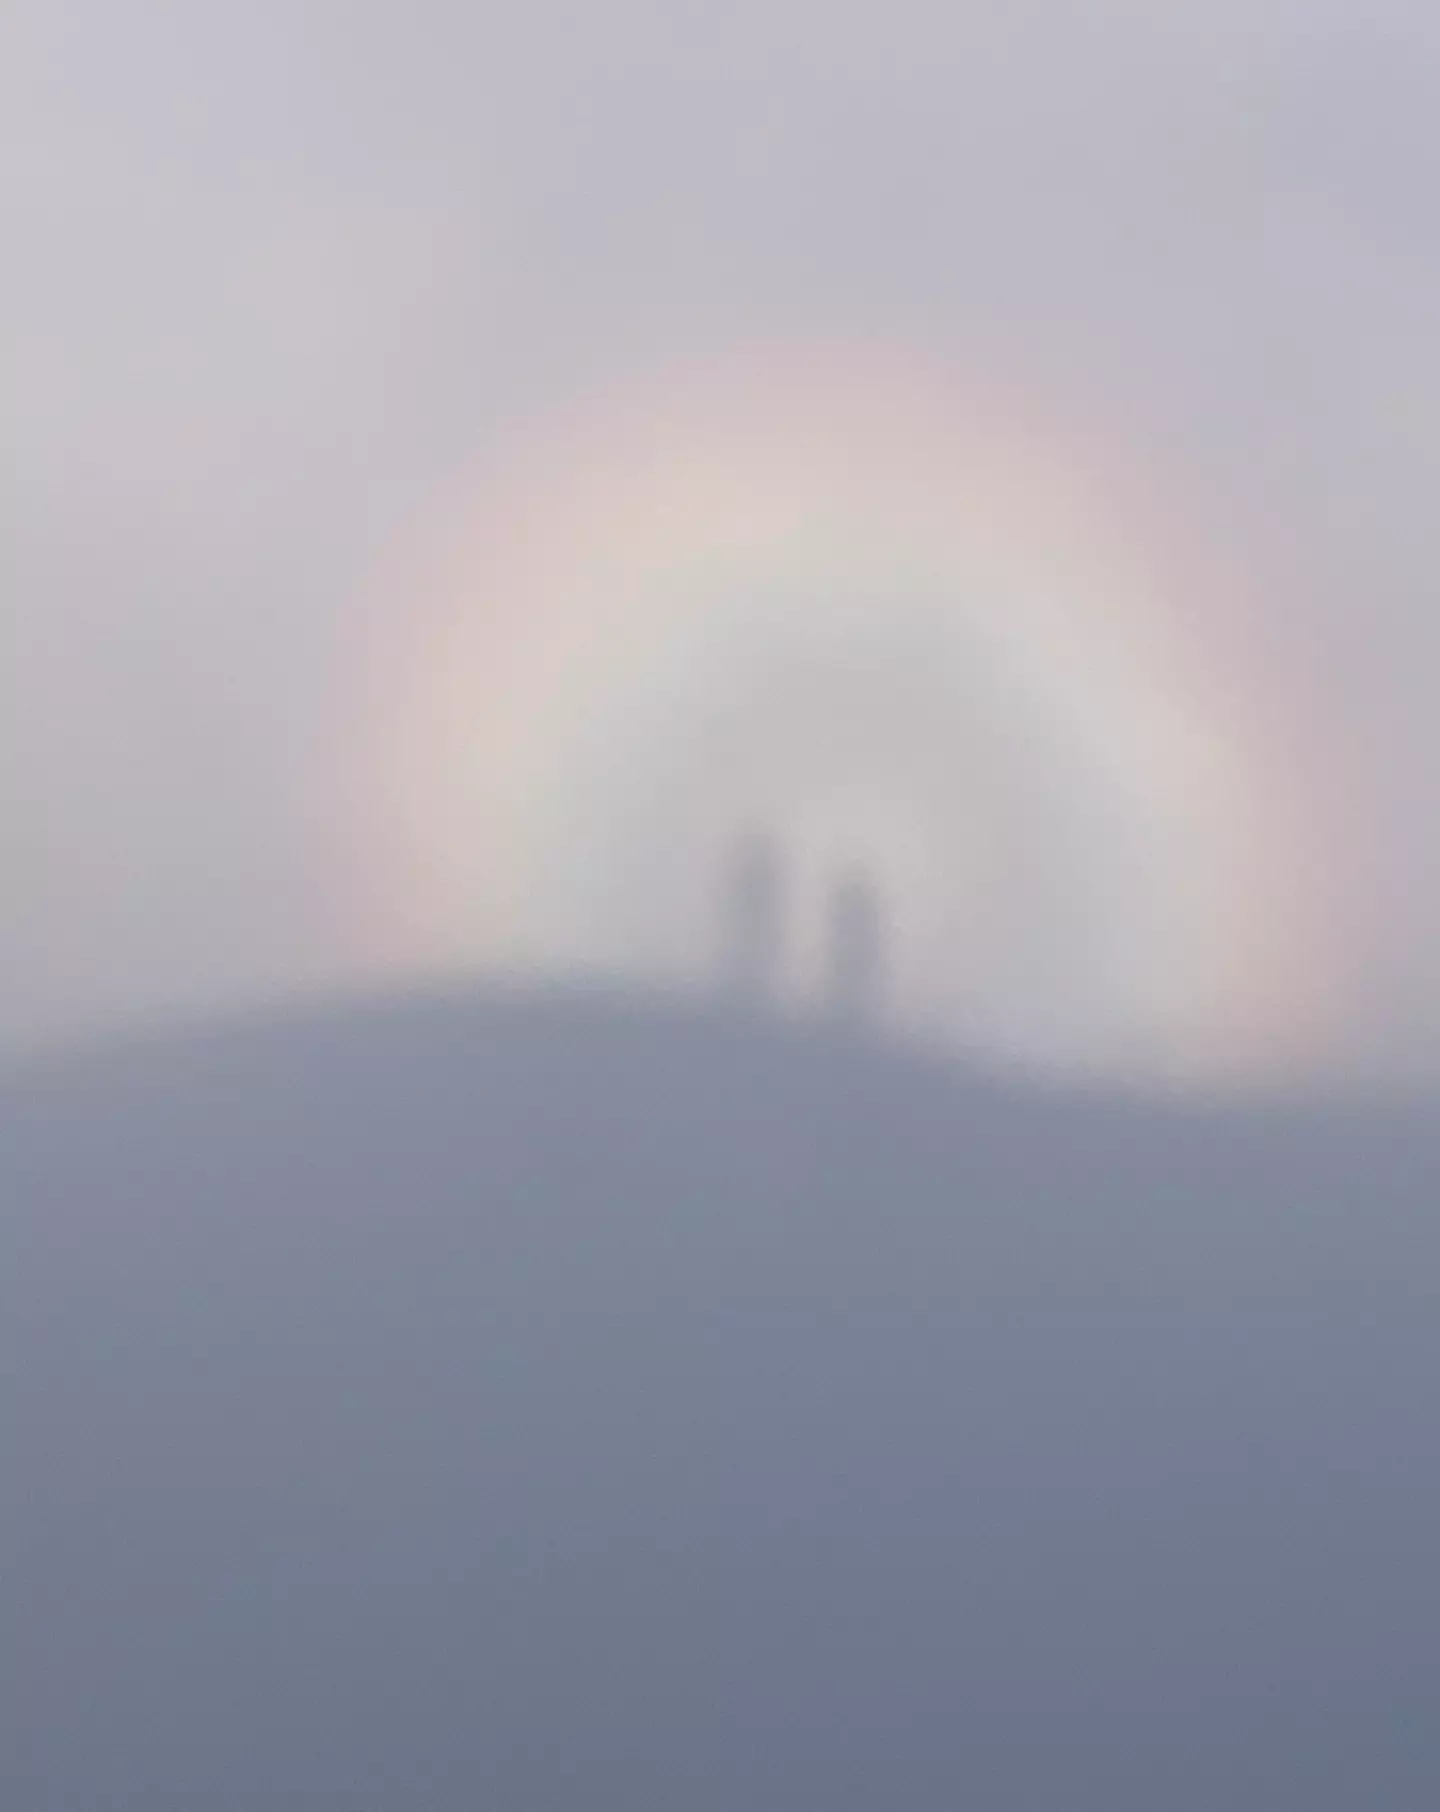 Another recent sighting of Brocken spectres - this time, framed by a rainbow.